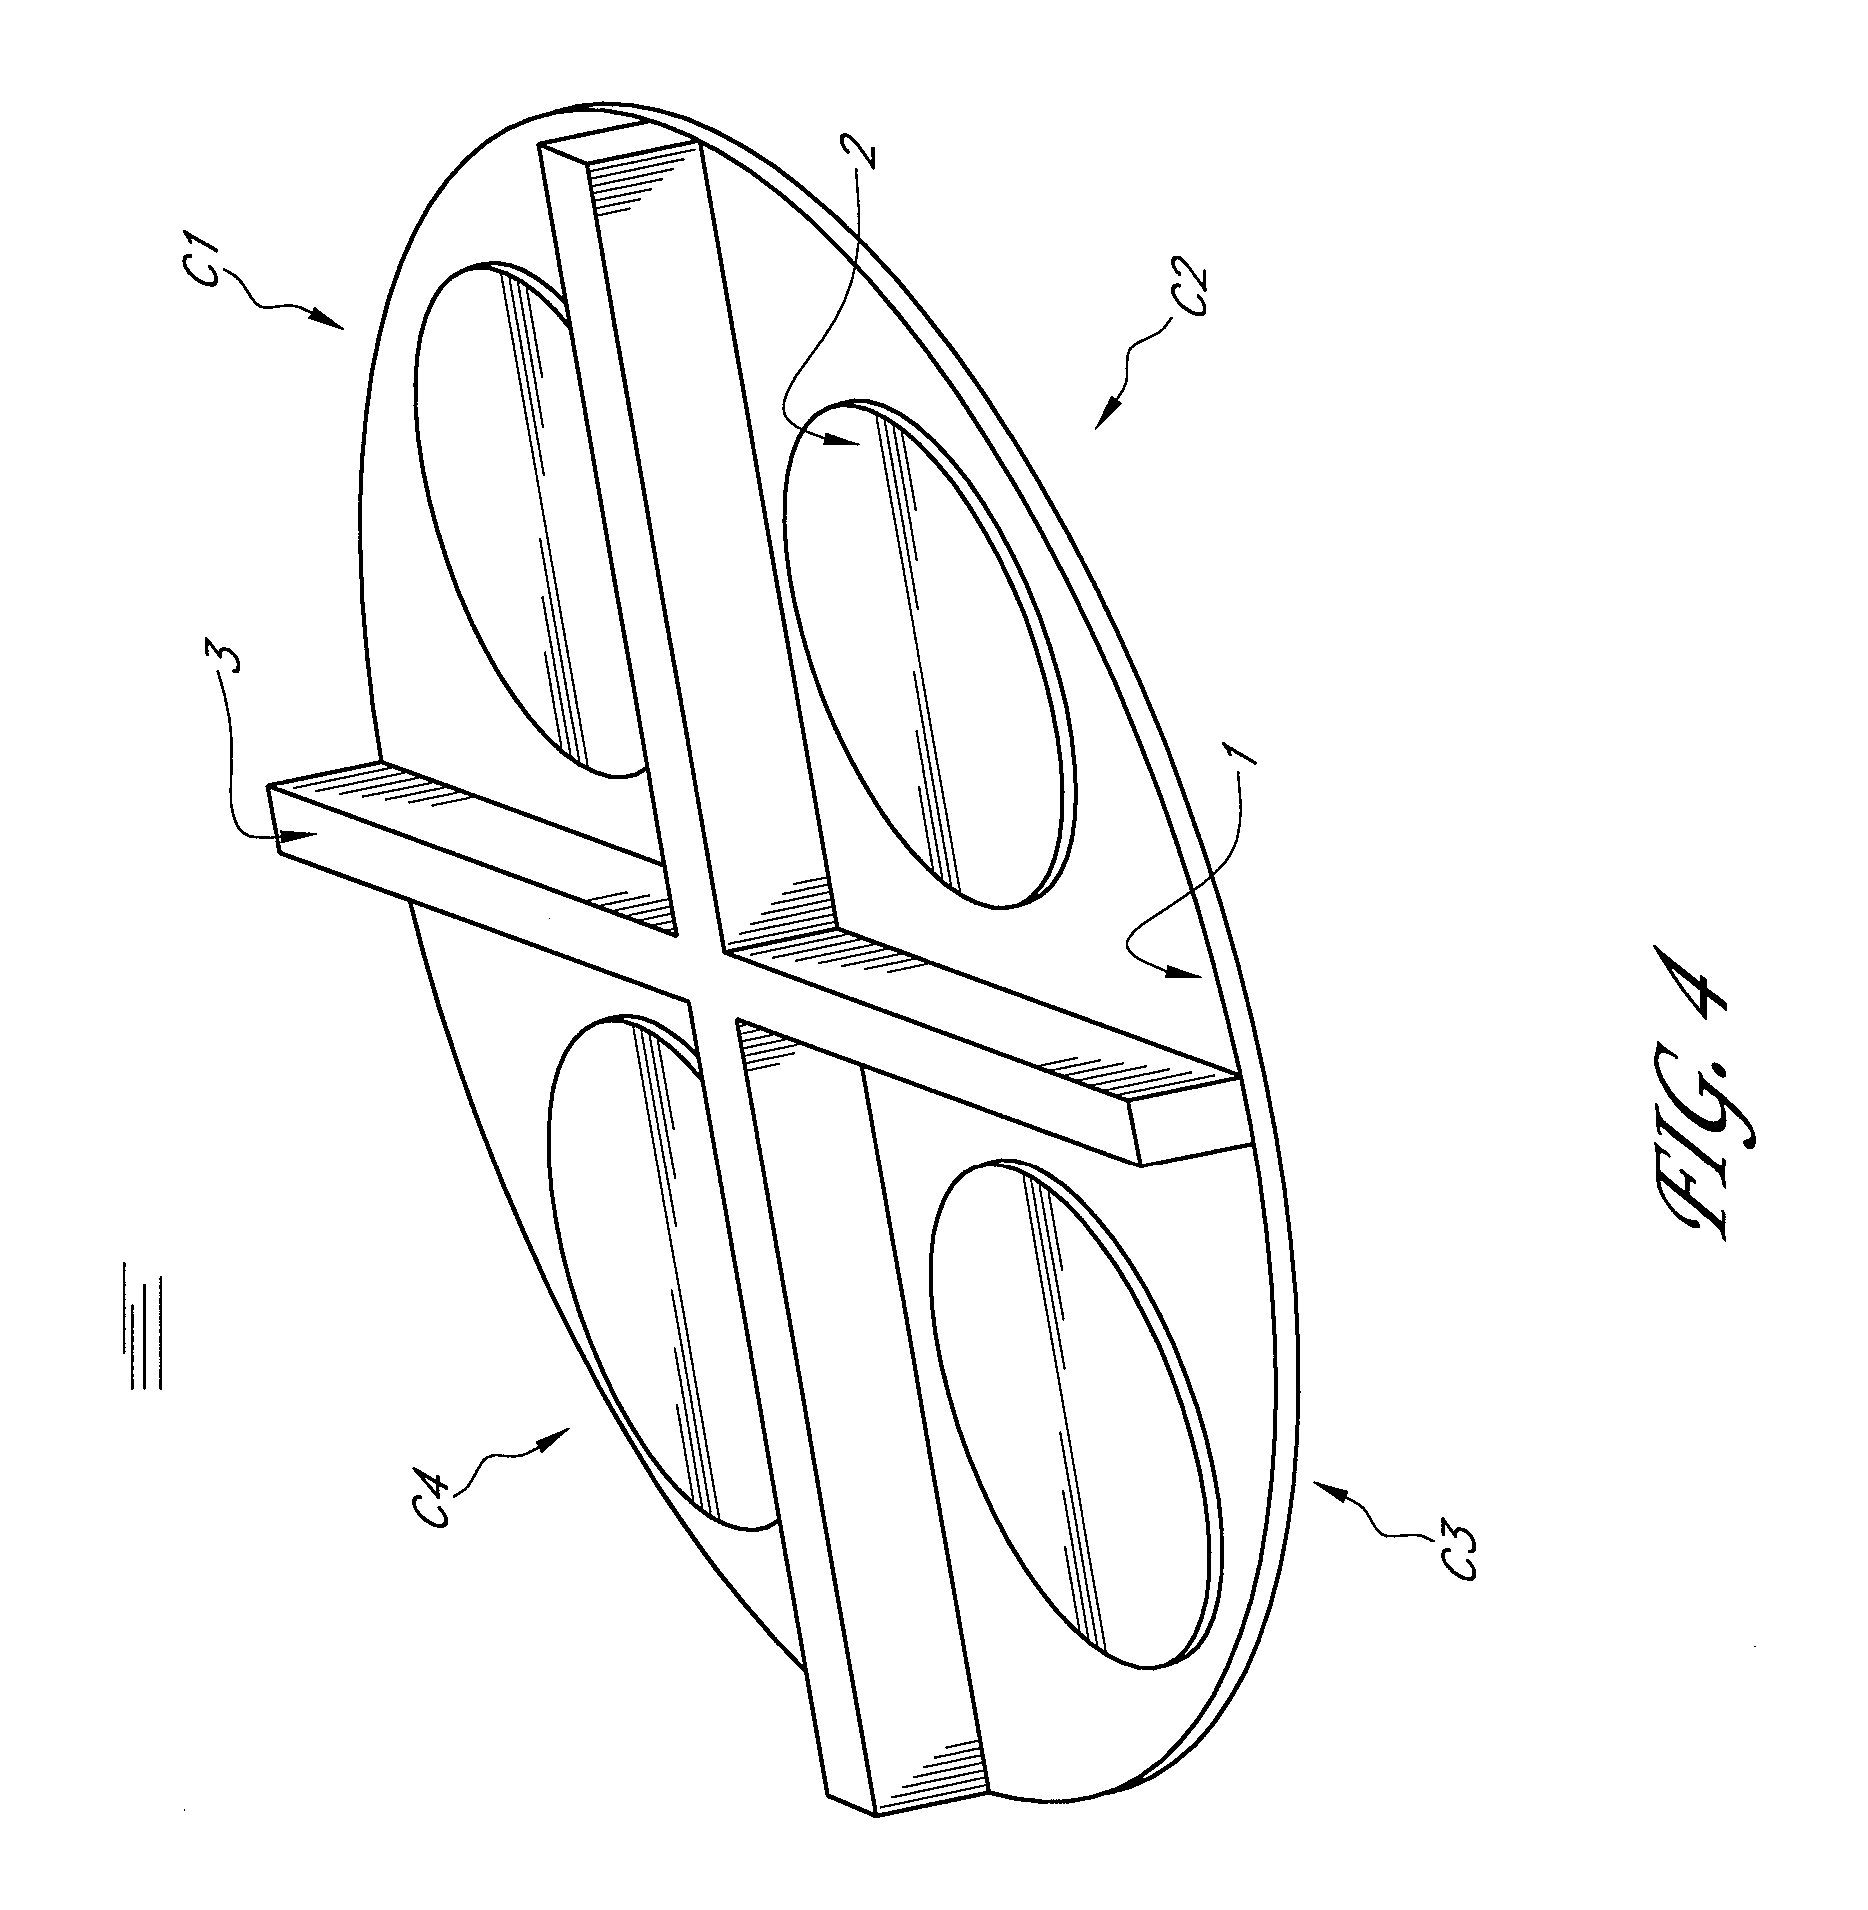 Semiconductor-processing apparatus with rotating susceptor